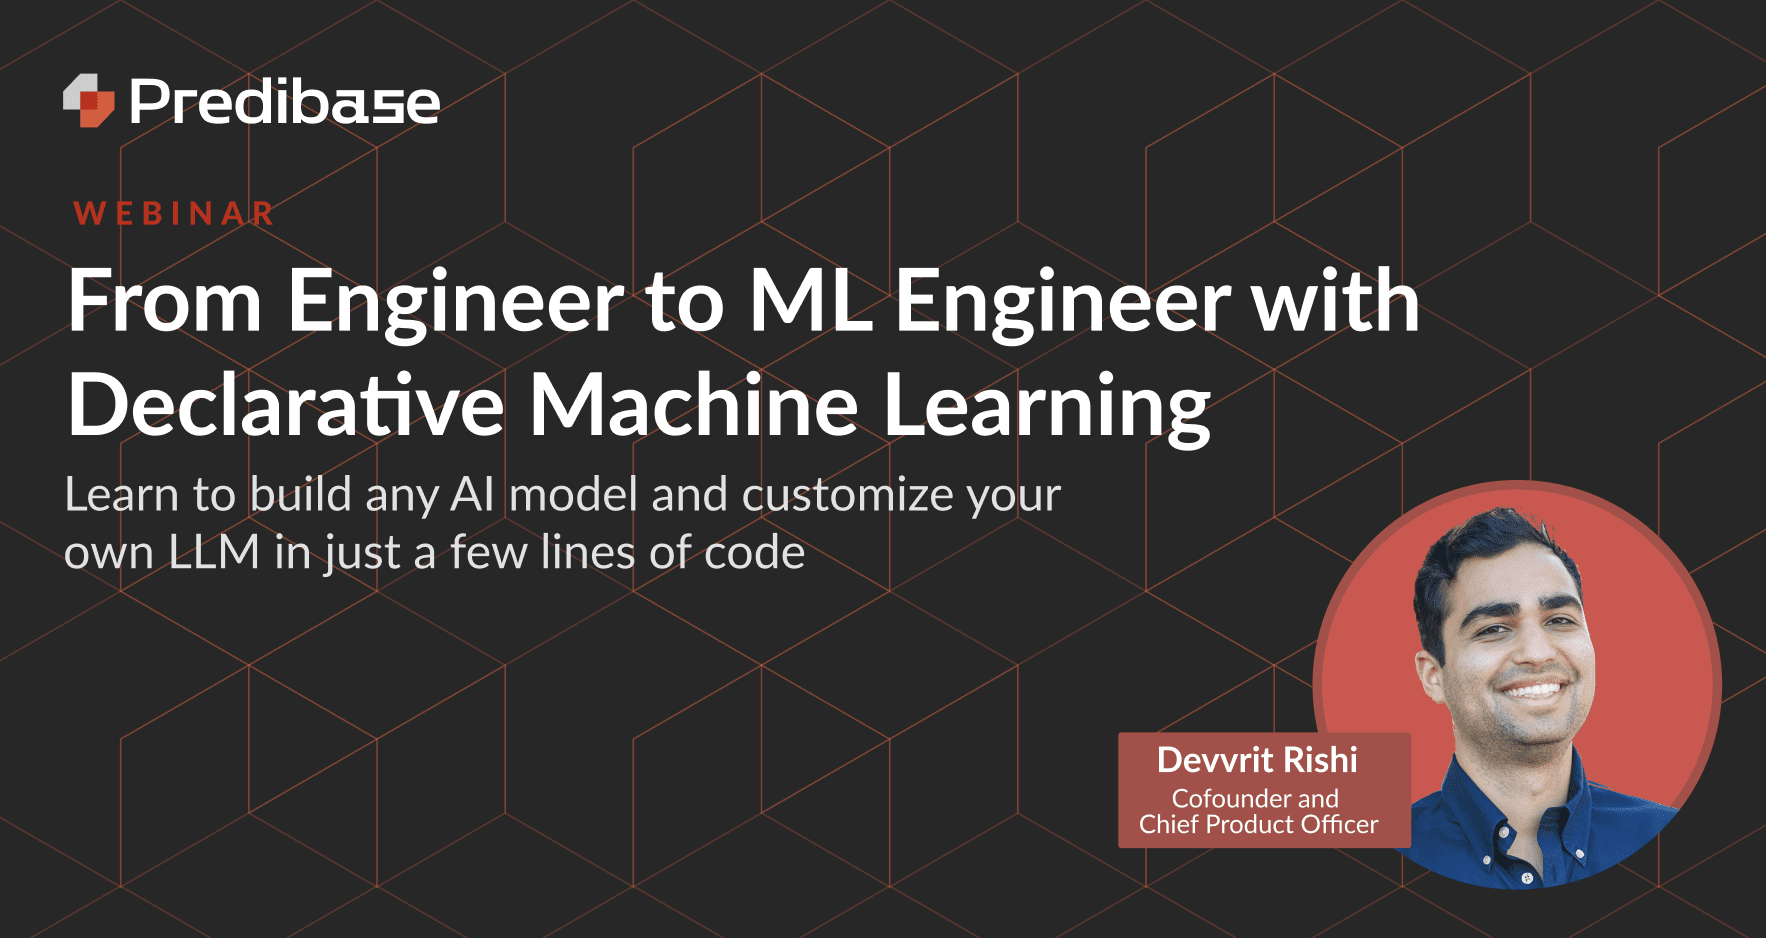 Go from Engineer to ML Engineer with Declarative ML